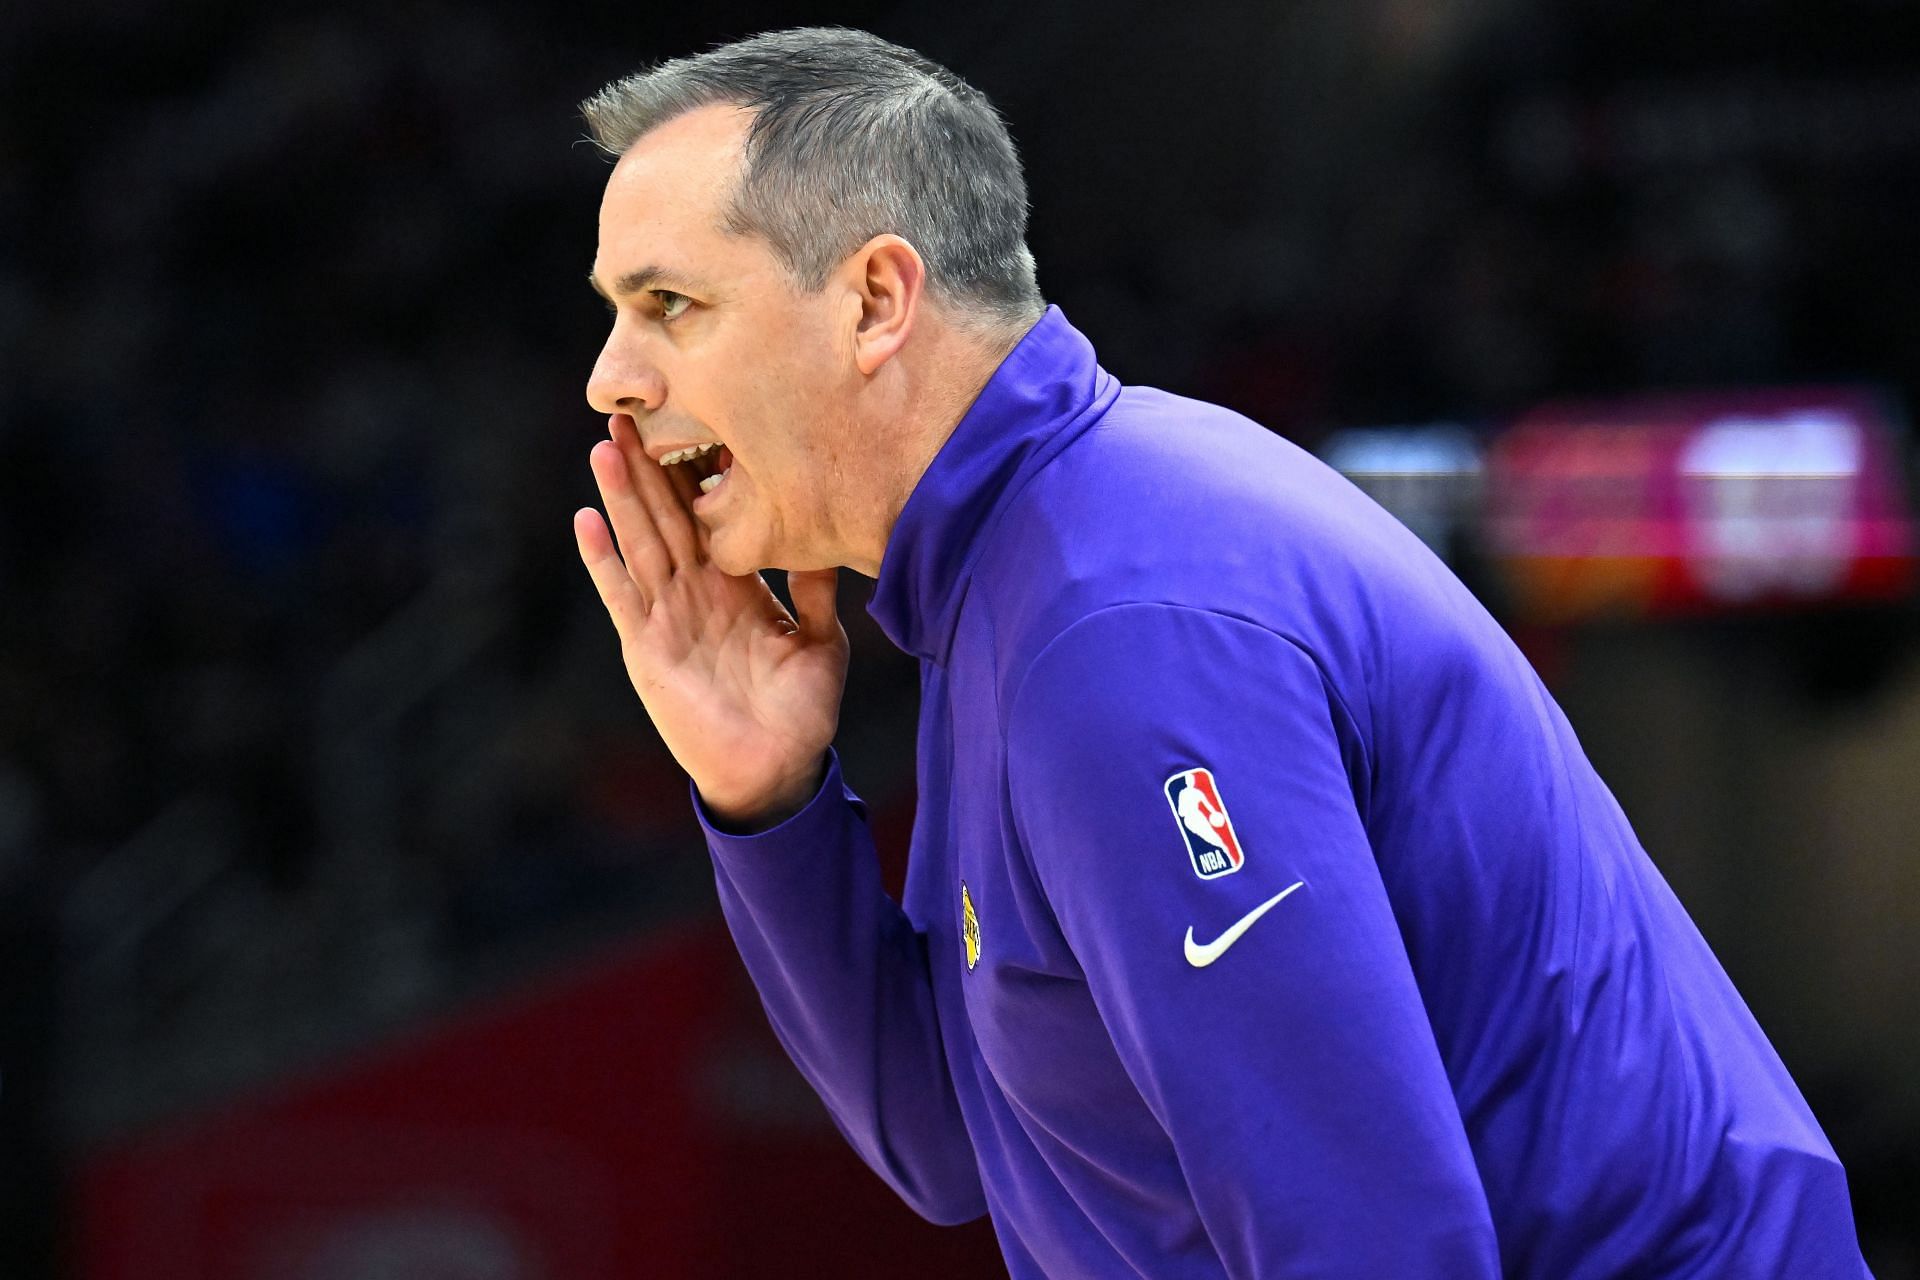 Head coach Frank Vogel of the LA Lakers yells to his players during the fourth quarter against the Cleveland Cavaliers at Rocket Mortgage Fieldhouse on March 21, 2022 in Cleveland, Ohio.